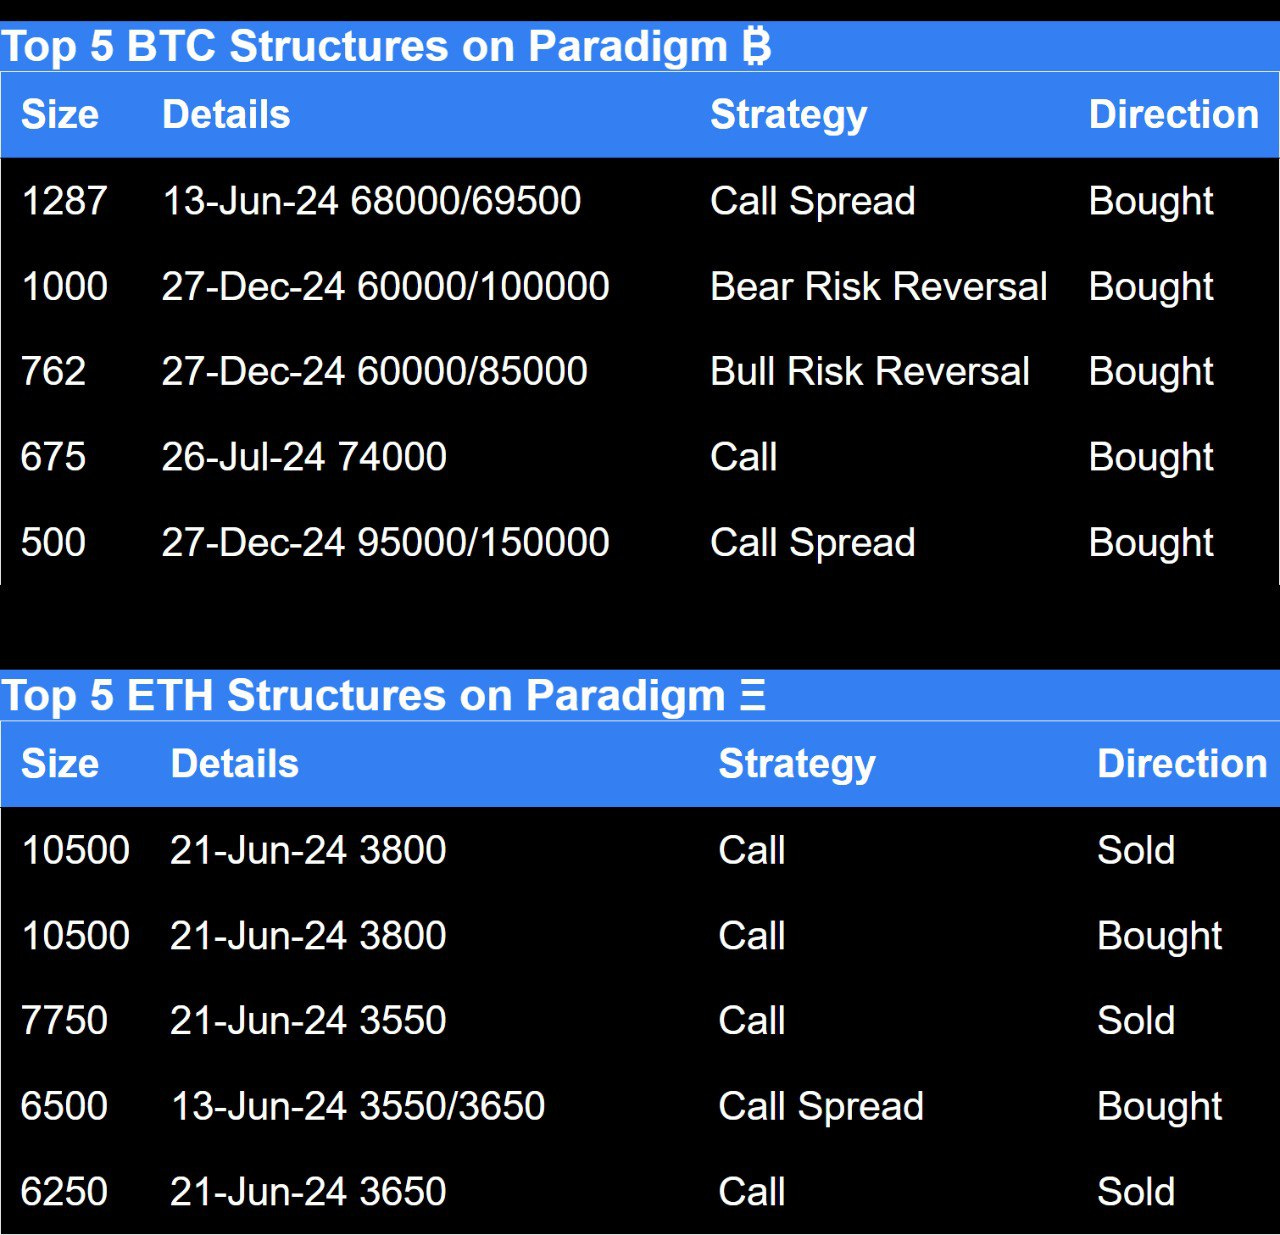 Top 5 BTC and ETH structures on paradigm 